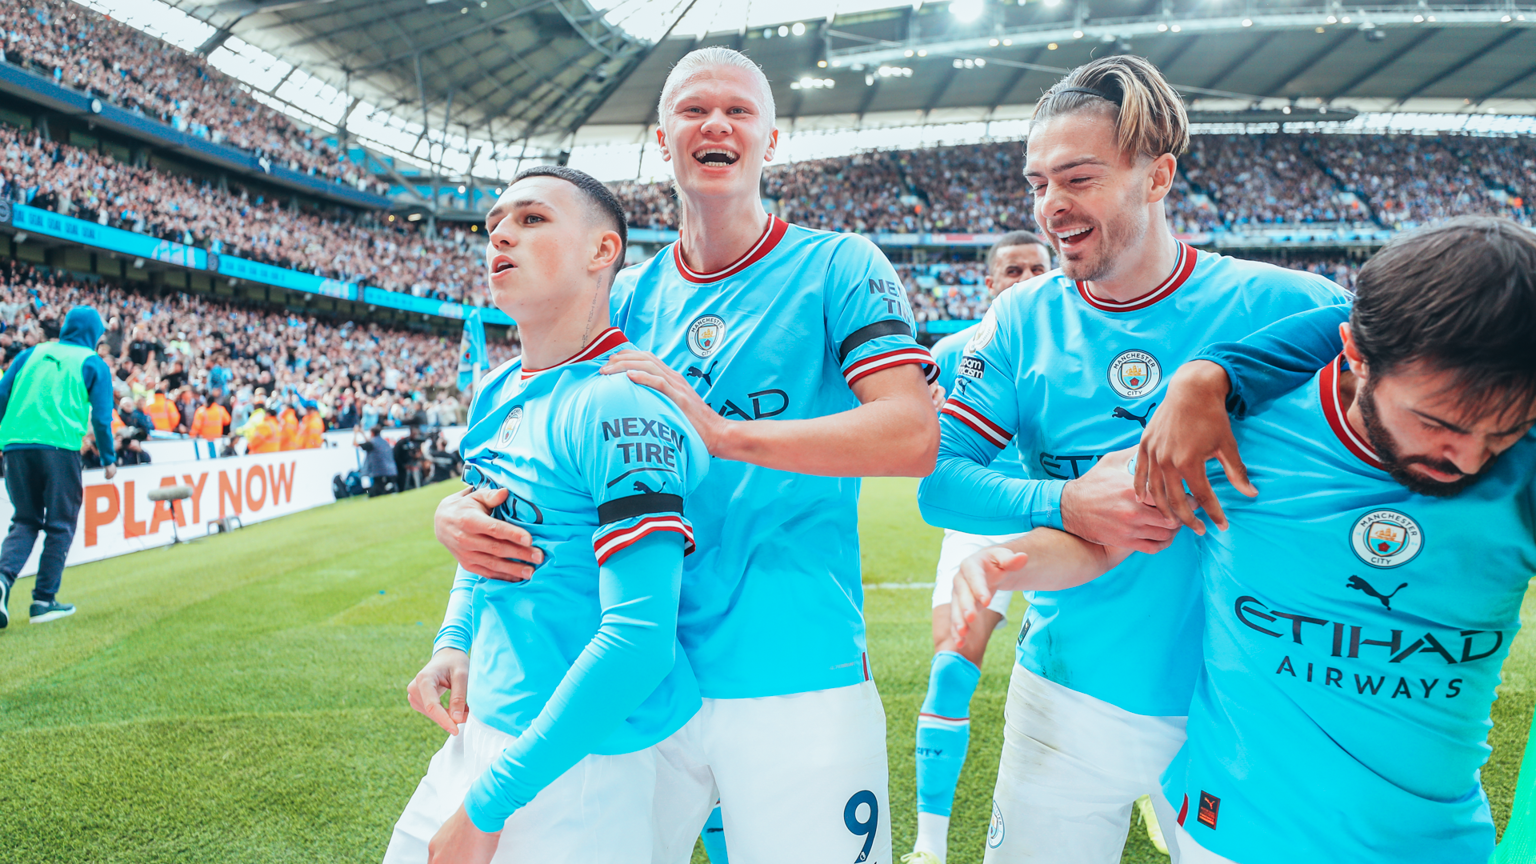 ALL SMILES: What a start at the Etihad!